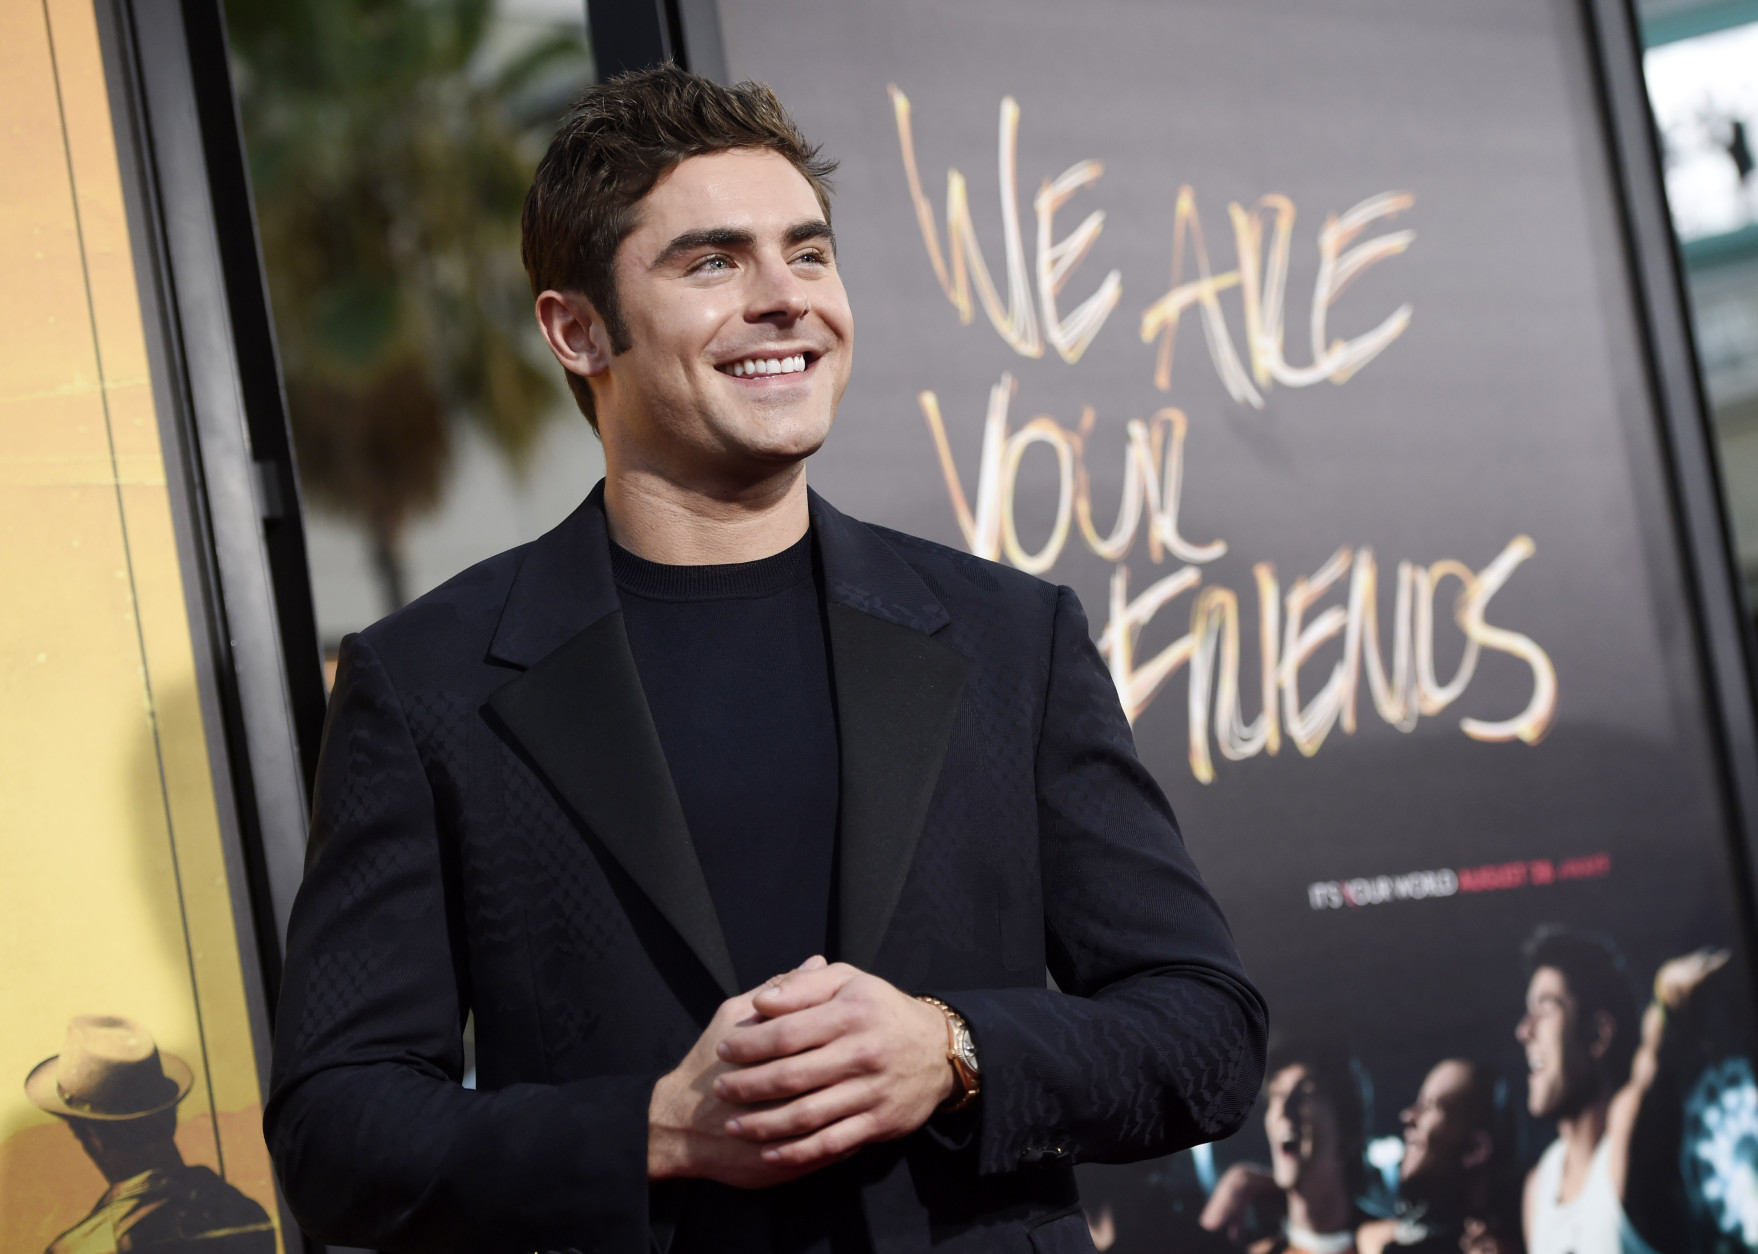 Zac Efron, a cast member in "We Are Your Friends," poses at the premiere of the film at the TCL Chinese Theatre on Thursday, Aug. 20, 2015, in Los Angeles. (Photo by Chris Pizzello/Invision/AP)